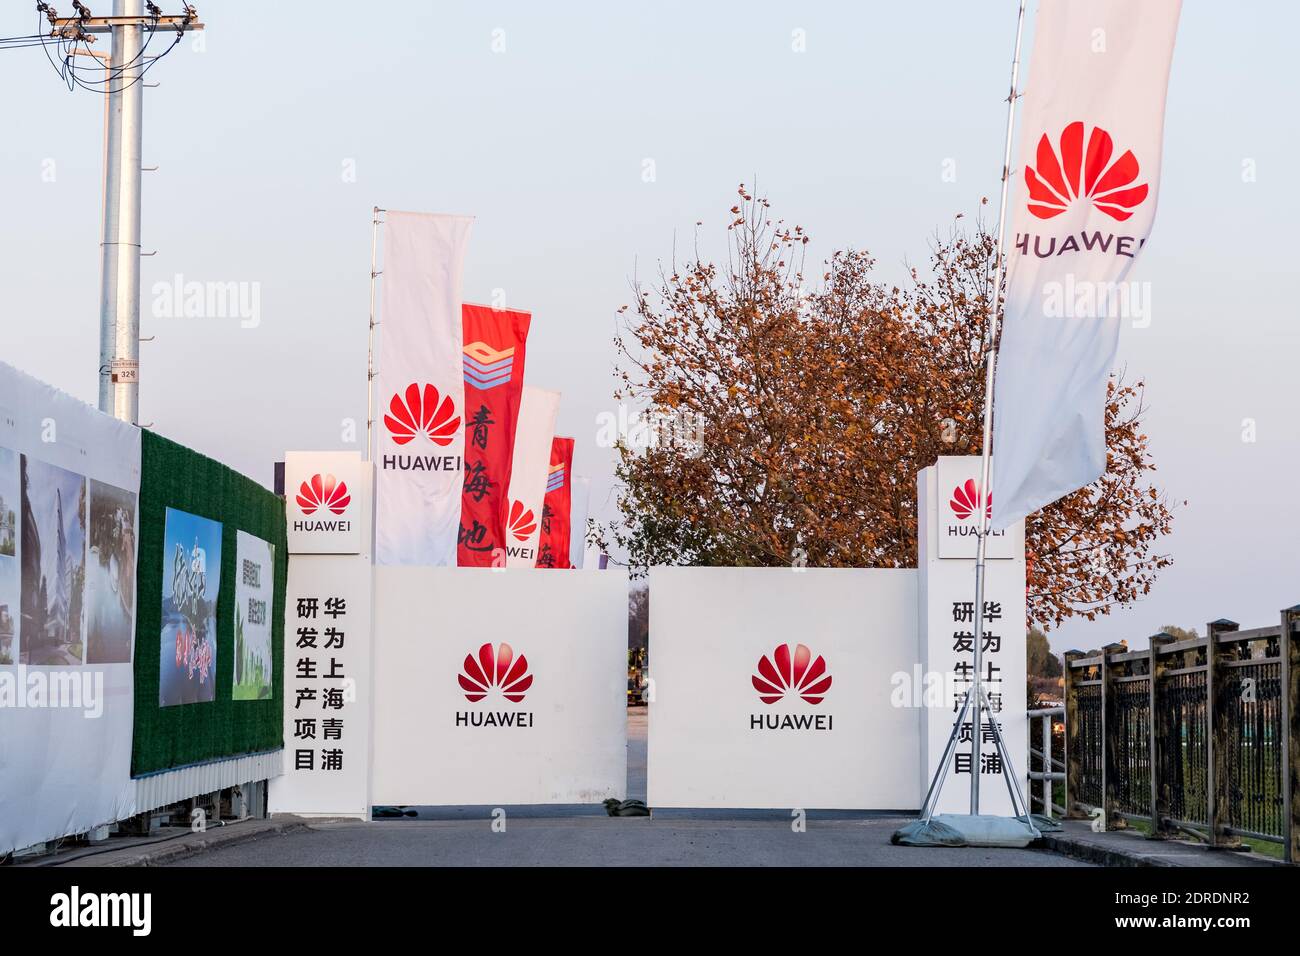 The Huawei Qingpu R&D base under construction is pictured in Qingpu district, Shanghai, China, 15 December 2020. Stock Photo